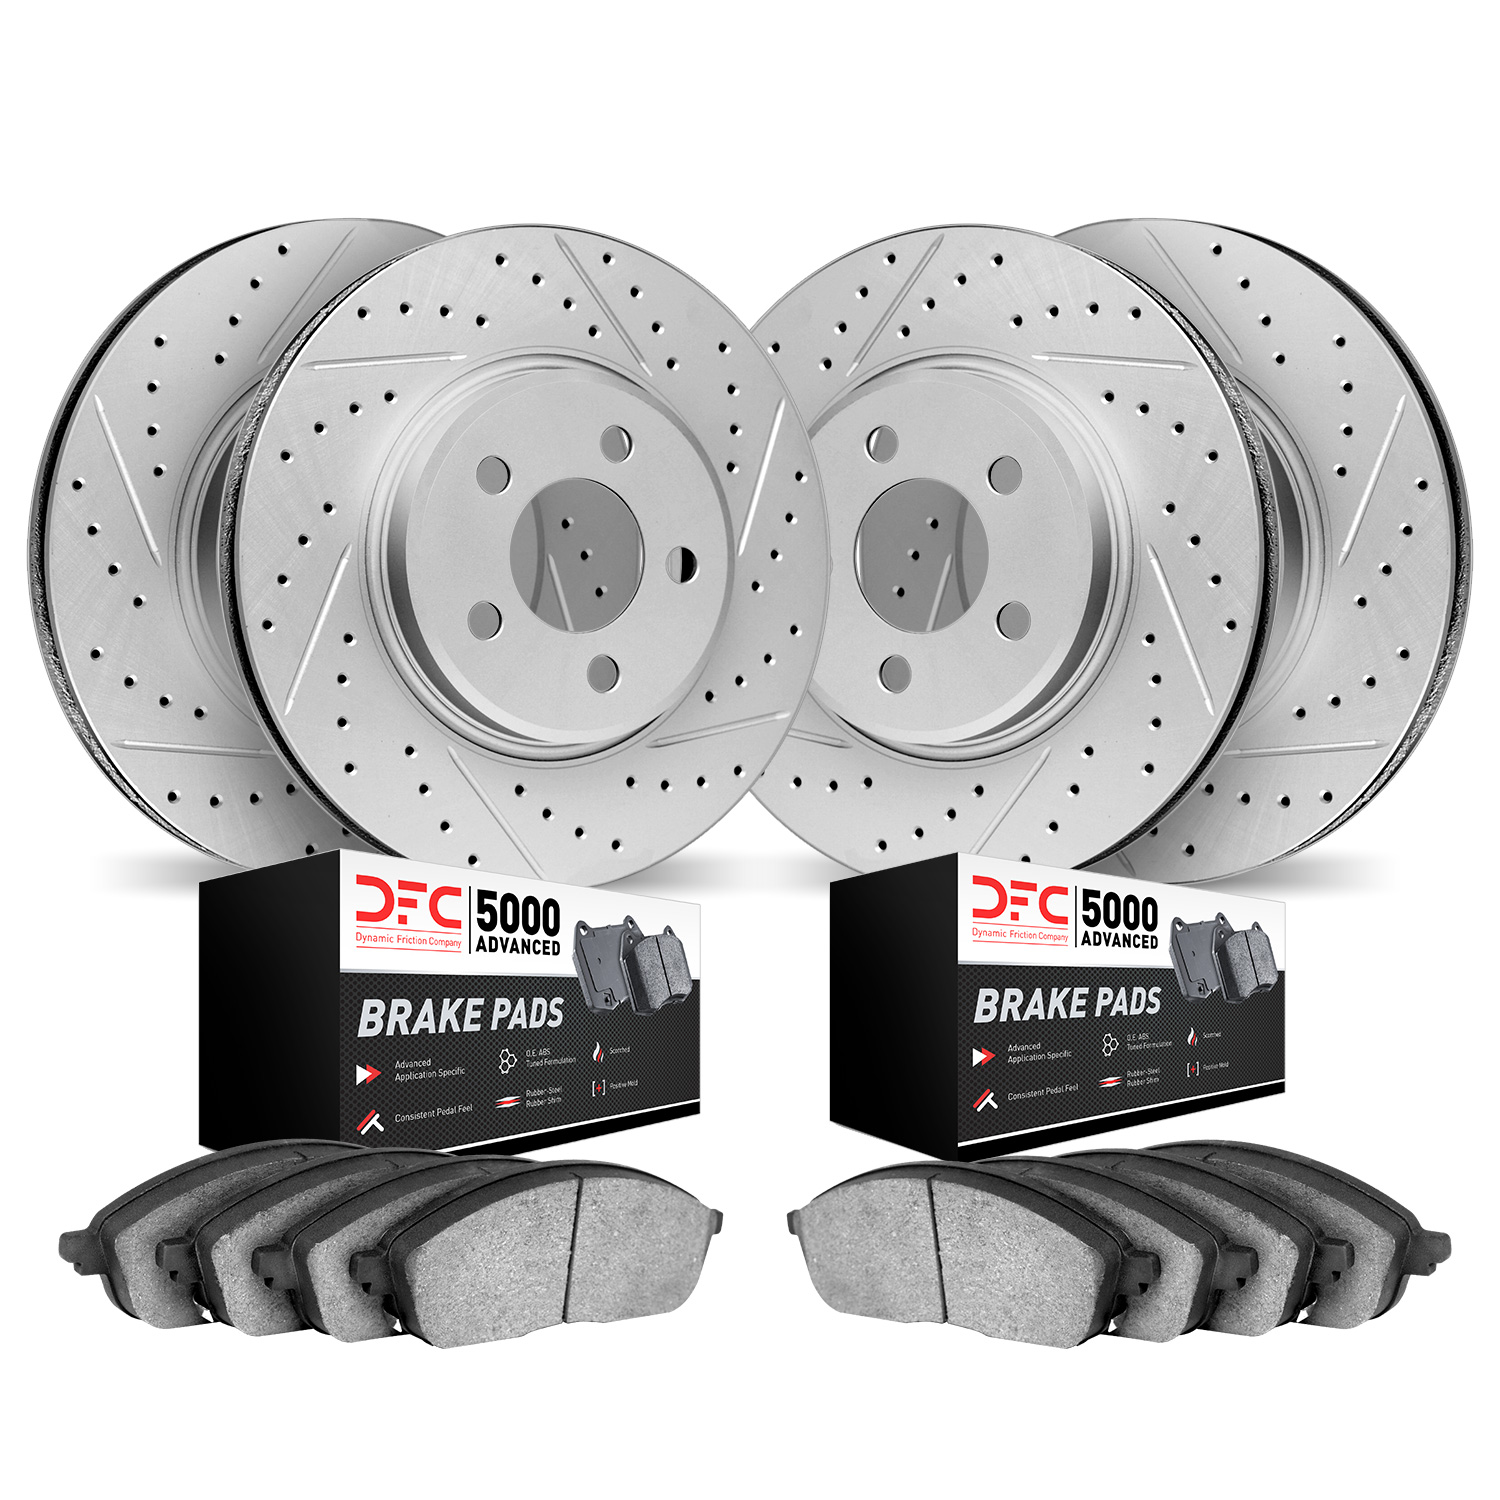 2504-31055 Geoperformance Drilled/Slotted Rotors w/5000 Advanced Brake Pads Kit, 2007-2014 BMW, Position: Front and Rear